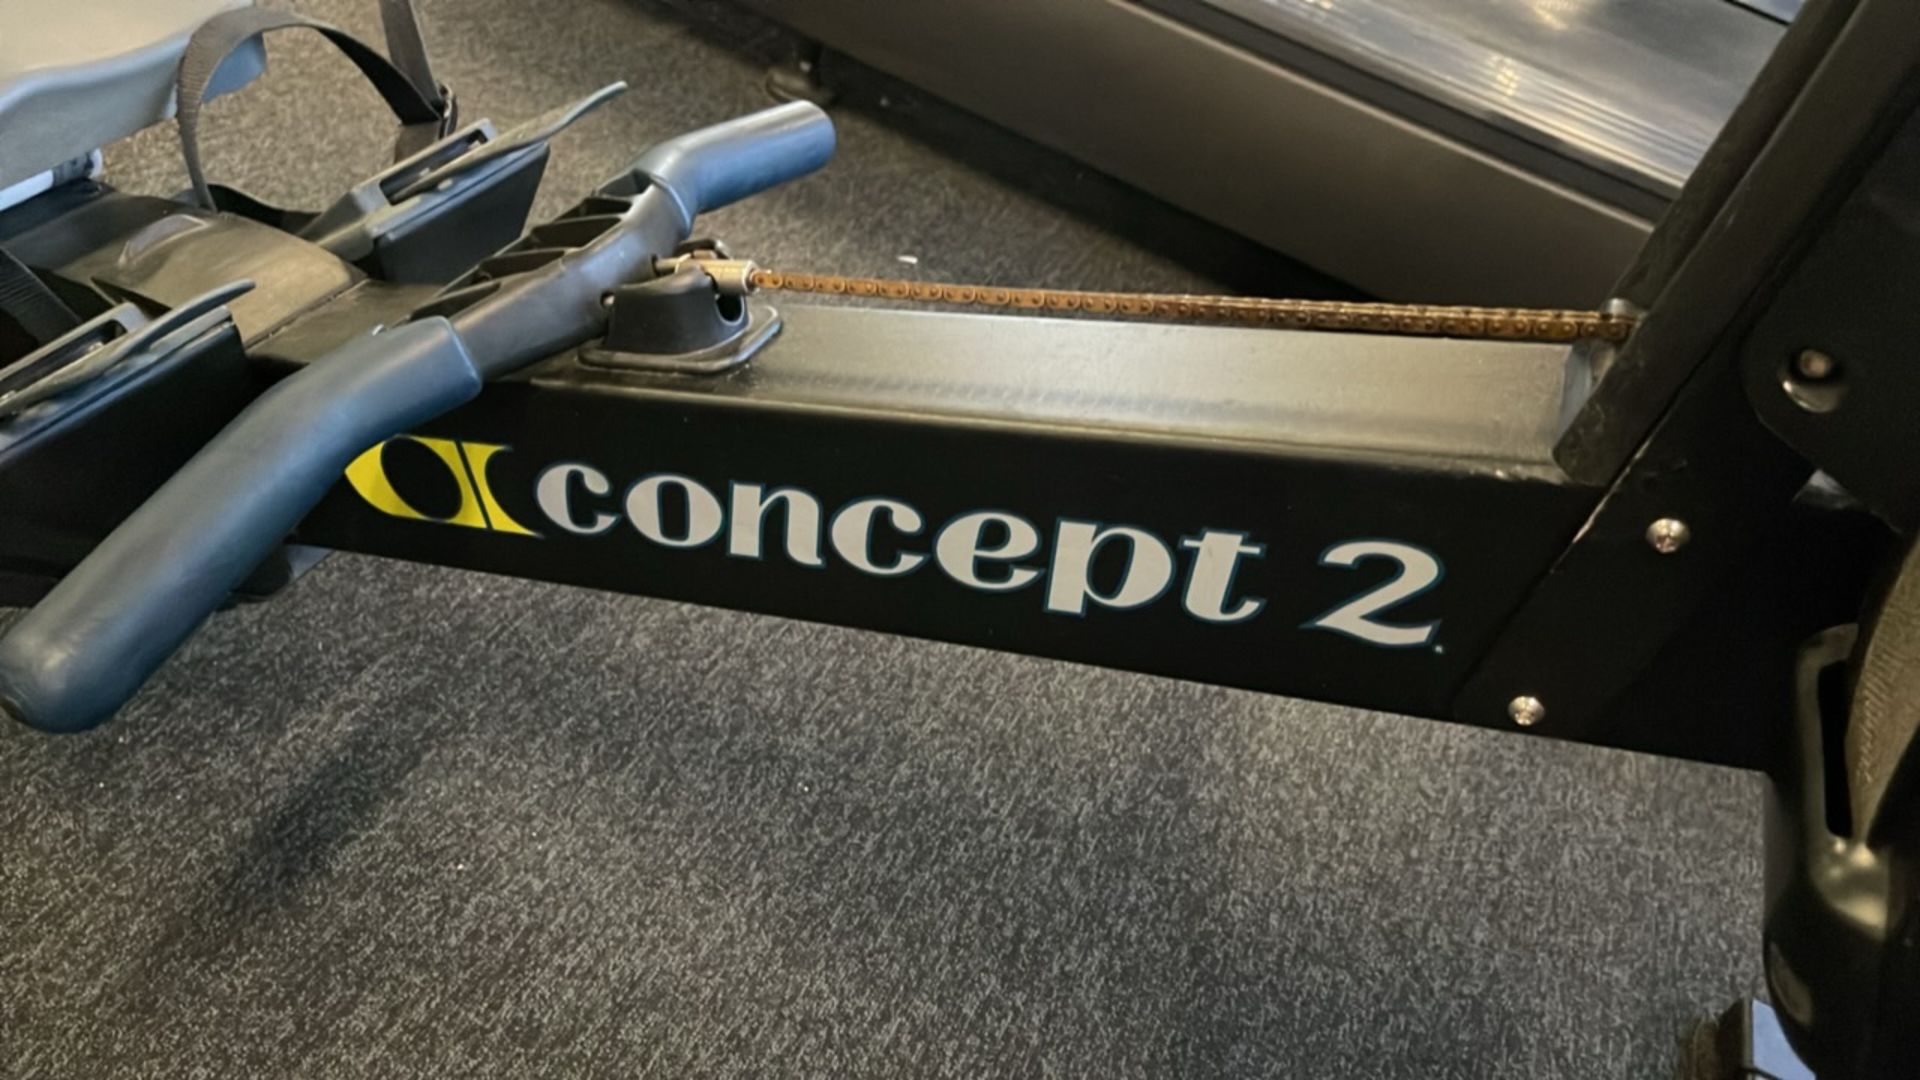 Concept 2 Model D Rower - Image 5 of 8